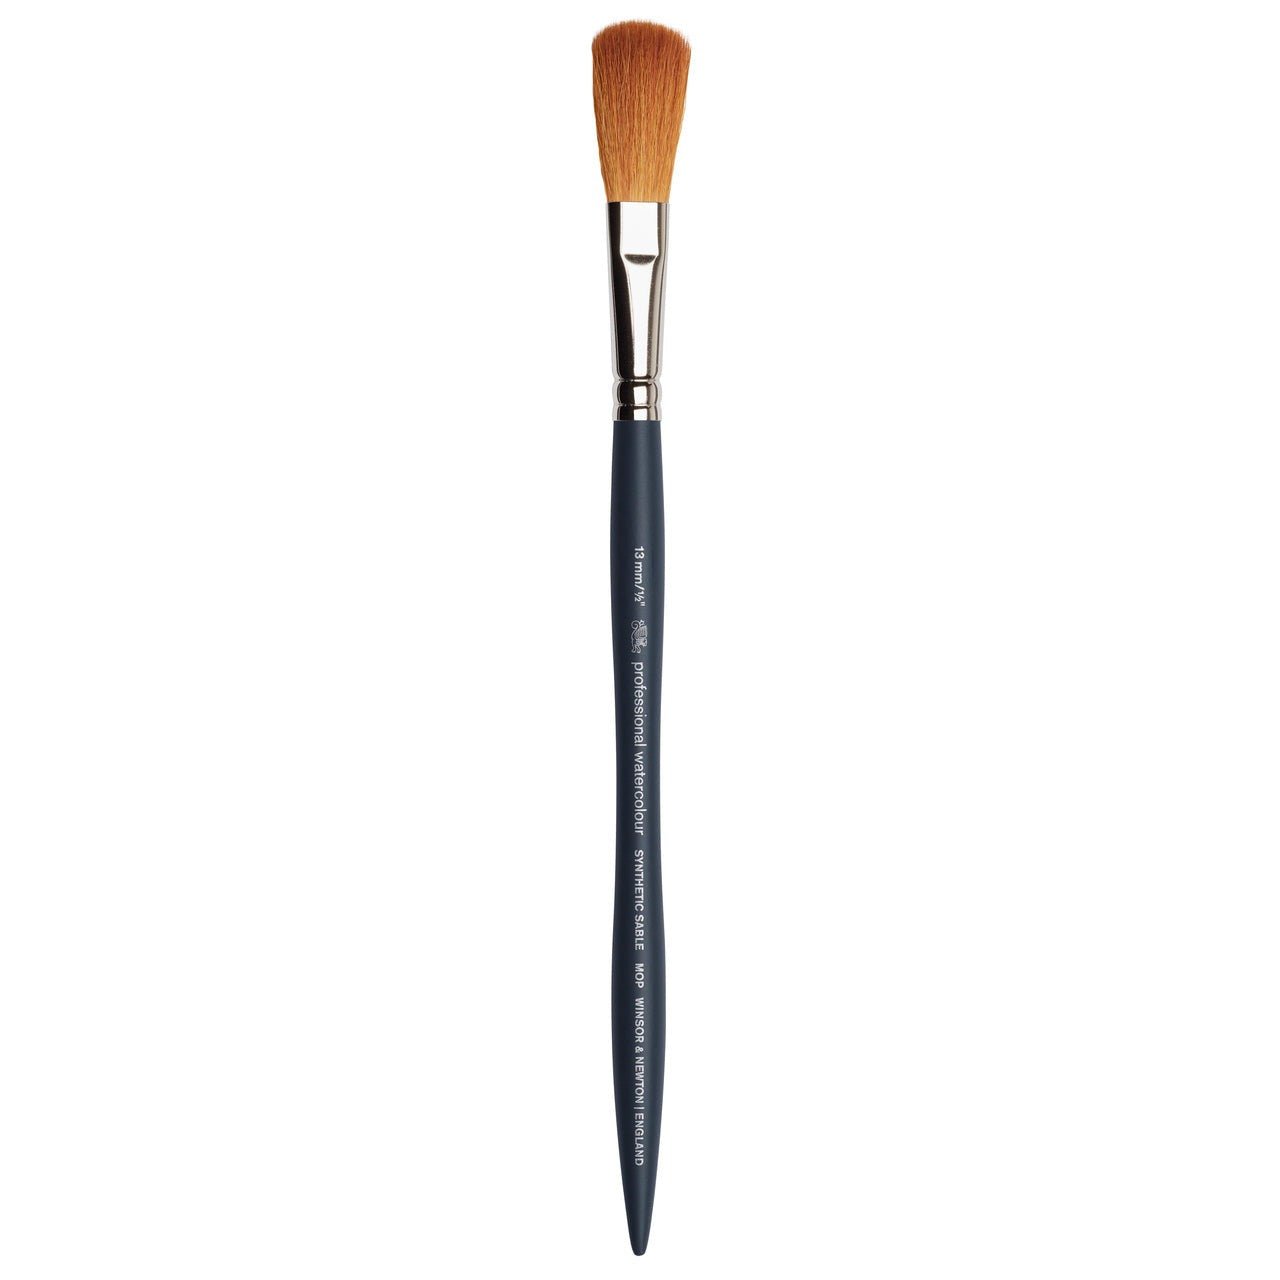 Winsor & Newton Professional Watercolor Synthetic Sable Brush - Mop 1/2 inch - merriartist.com